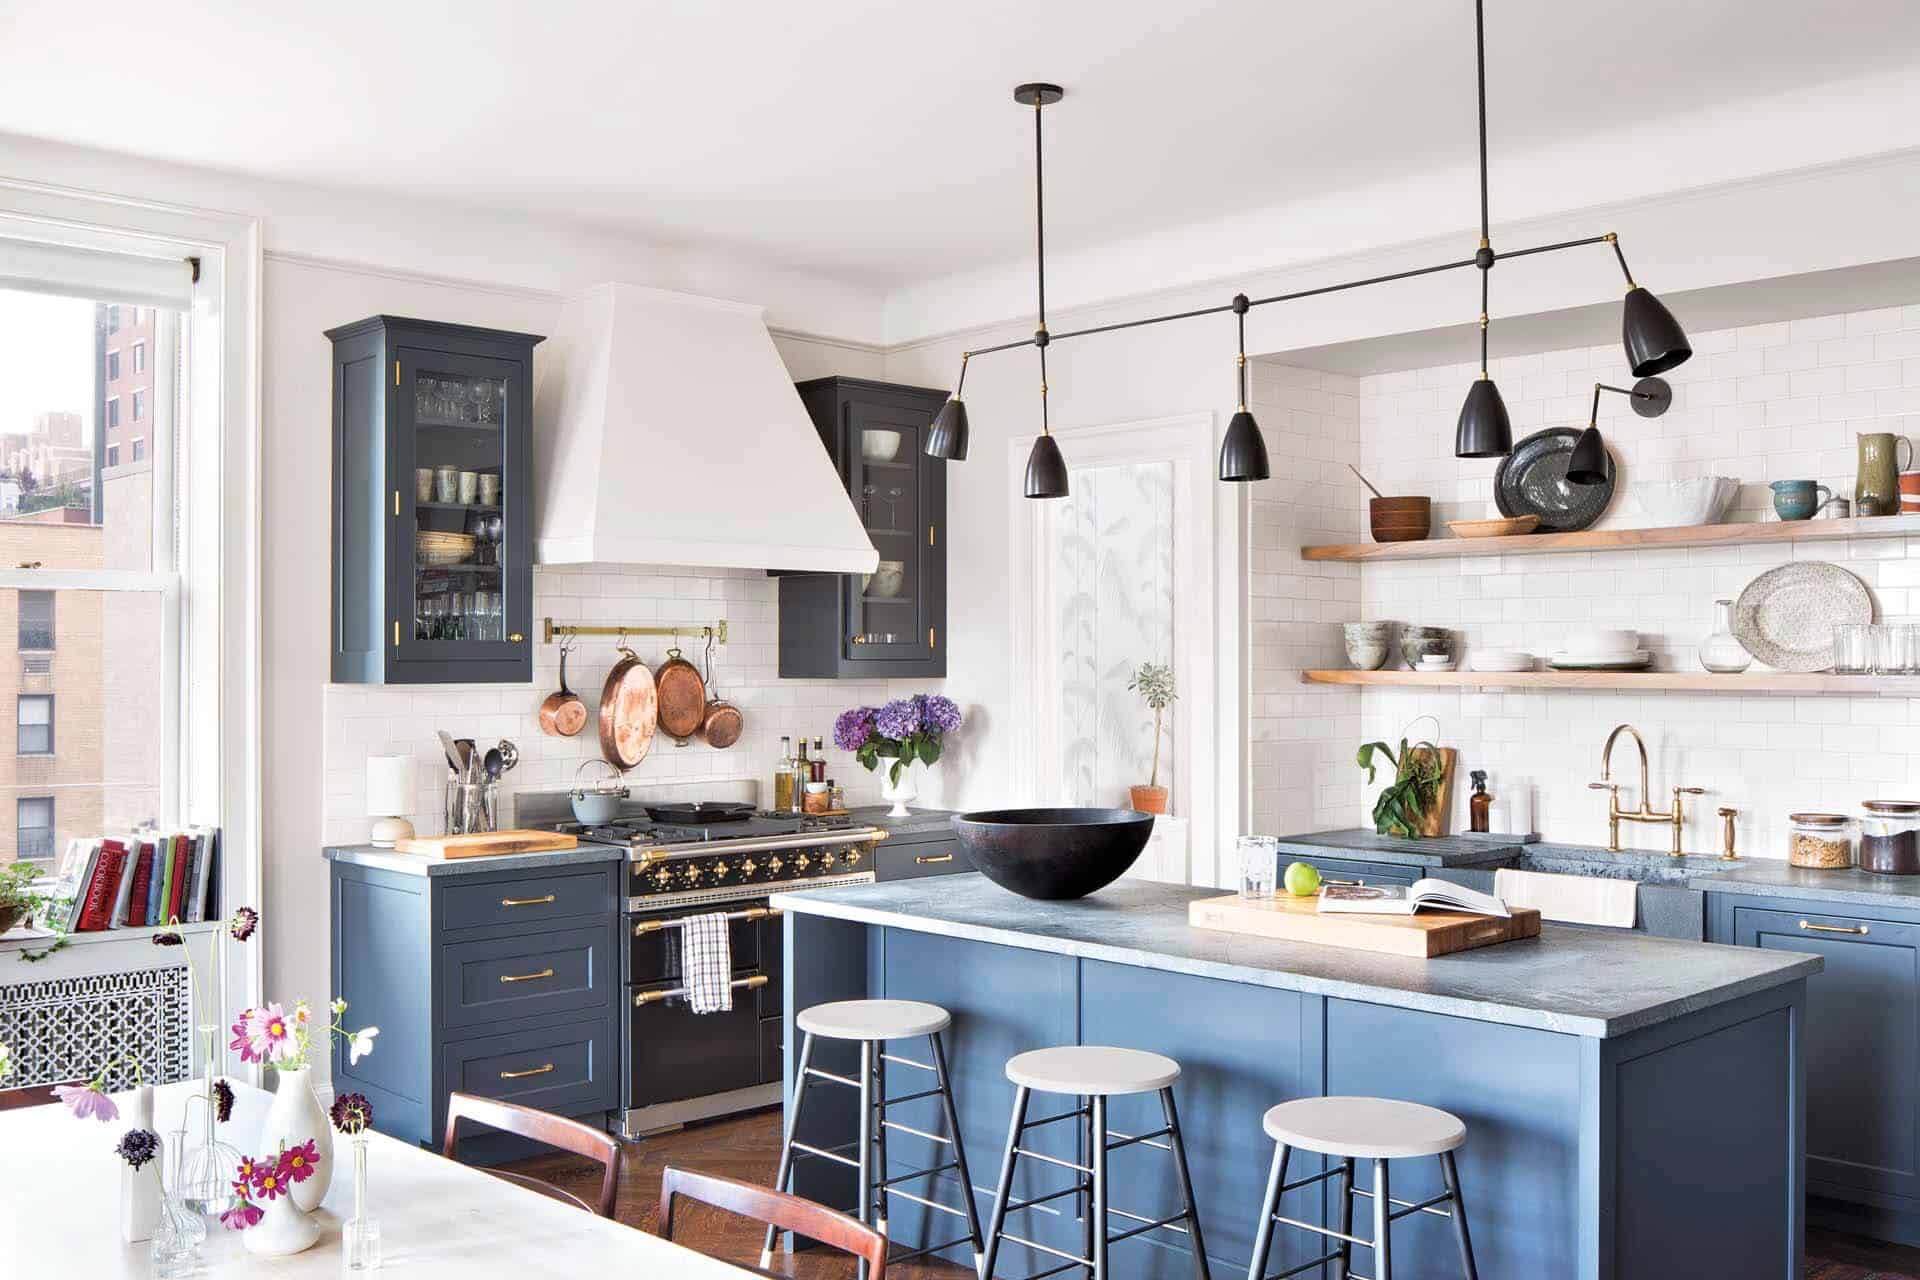 Elegant brownstone kitchen with glazed tile walls, blue painted cabinets with inset doors and Lacanche range.